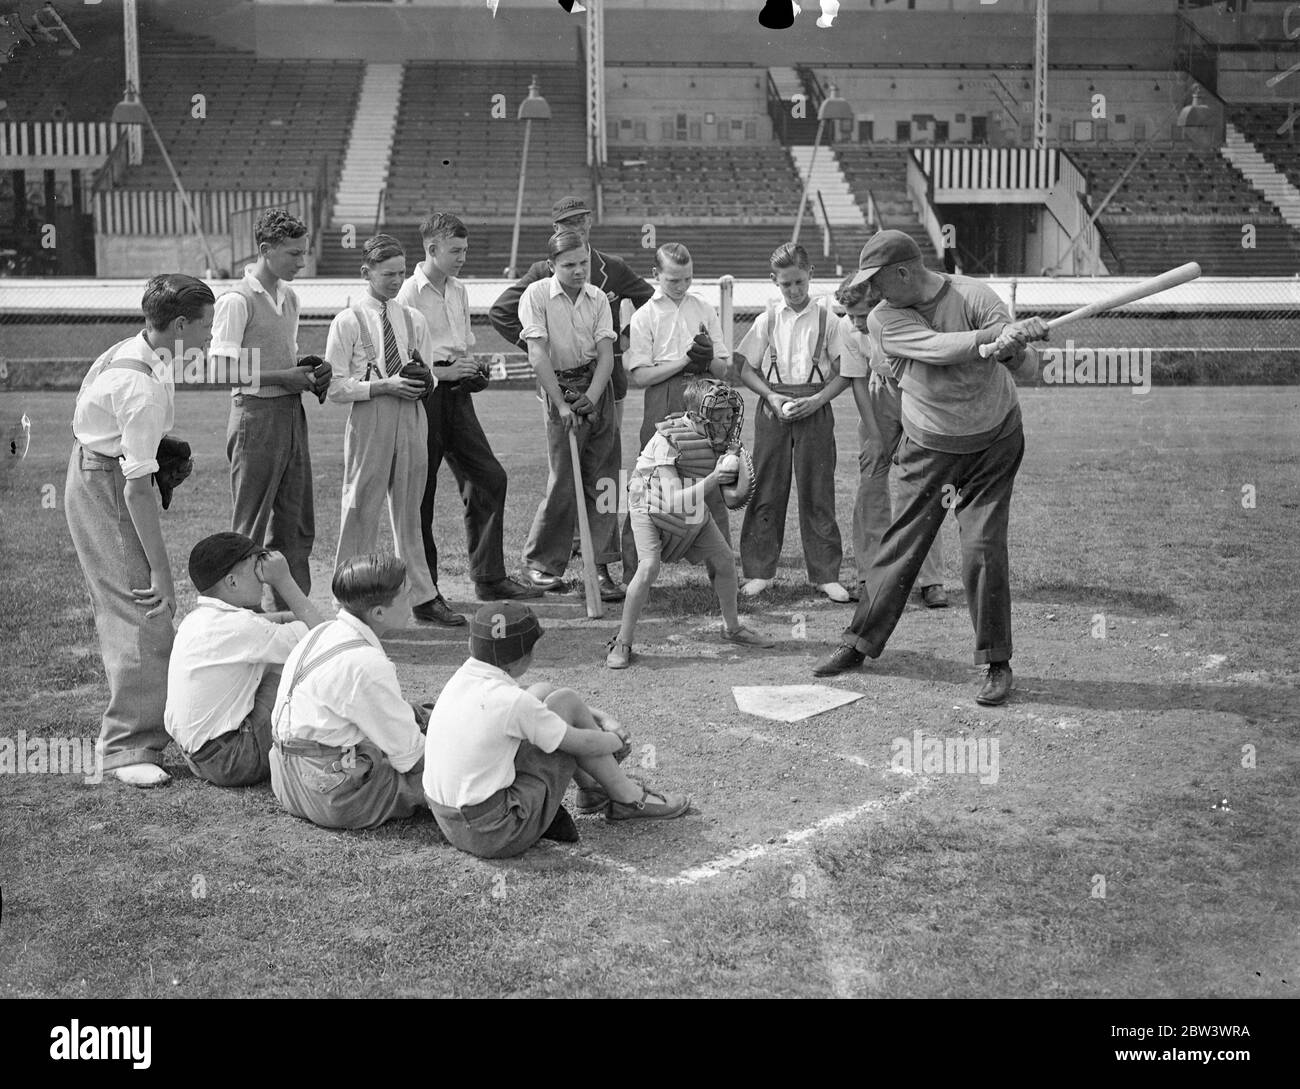 A Hundred London Boys Learn How To Play Baseball At The White City To discover young baseball talent , a hundred boys turned out for tuition at the White City Stadium under the guidance of  Doc  Hayden , the American manager - coach . Small - sized baseball gloves were provided , and the boys received instruction in fieldinf , pitching and batting . Boys who show the highest promise will play next year in a new juniour league . Photo shows :  Doc  Hayden showing the boys how to strike . 17 Aug 1936 Stock Photo